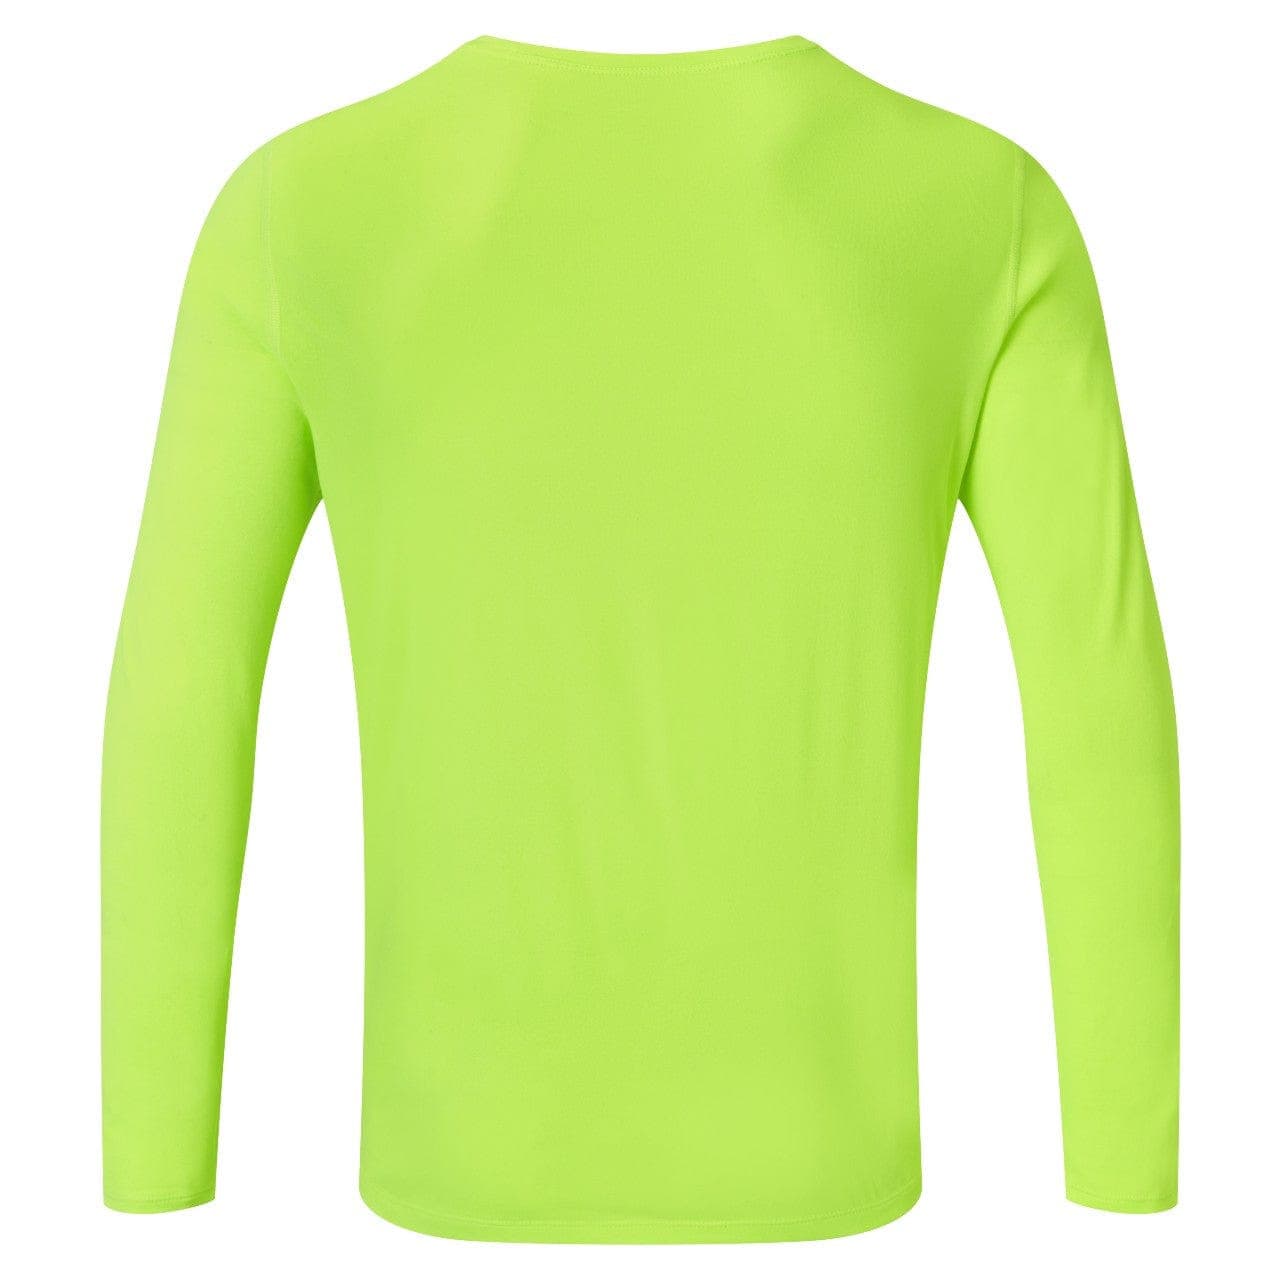 Ronhill Core L/S Tee (Mens) - Fluo Yellow/Black